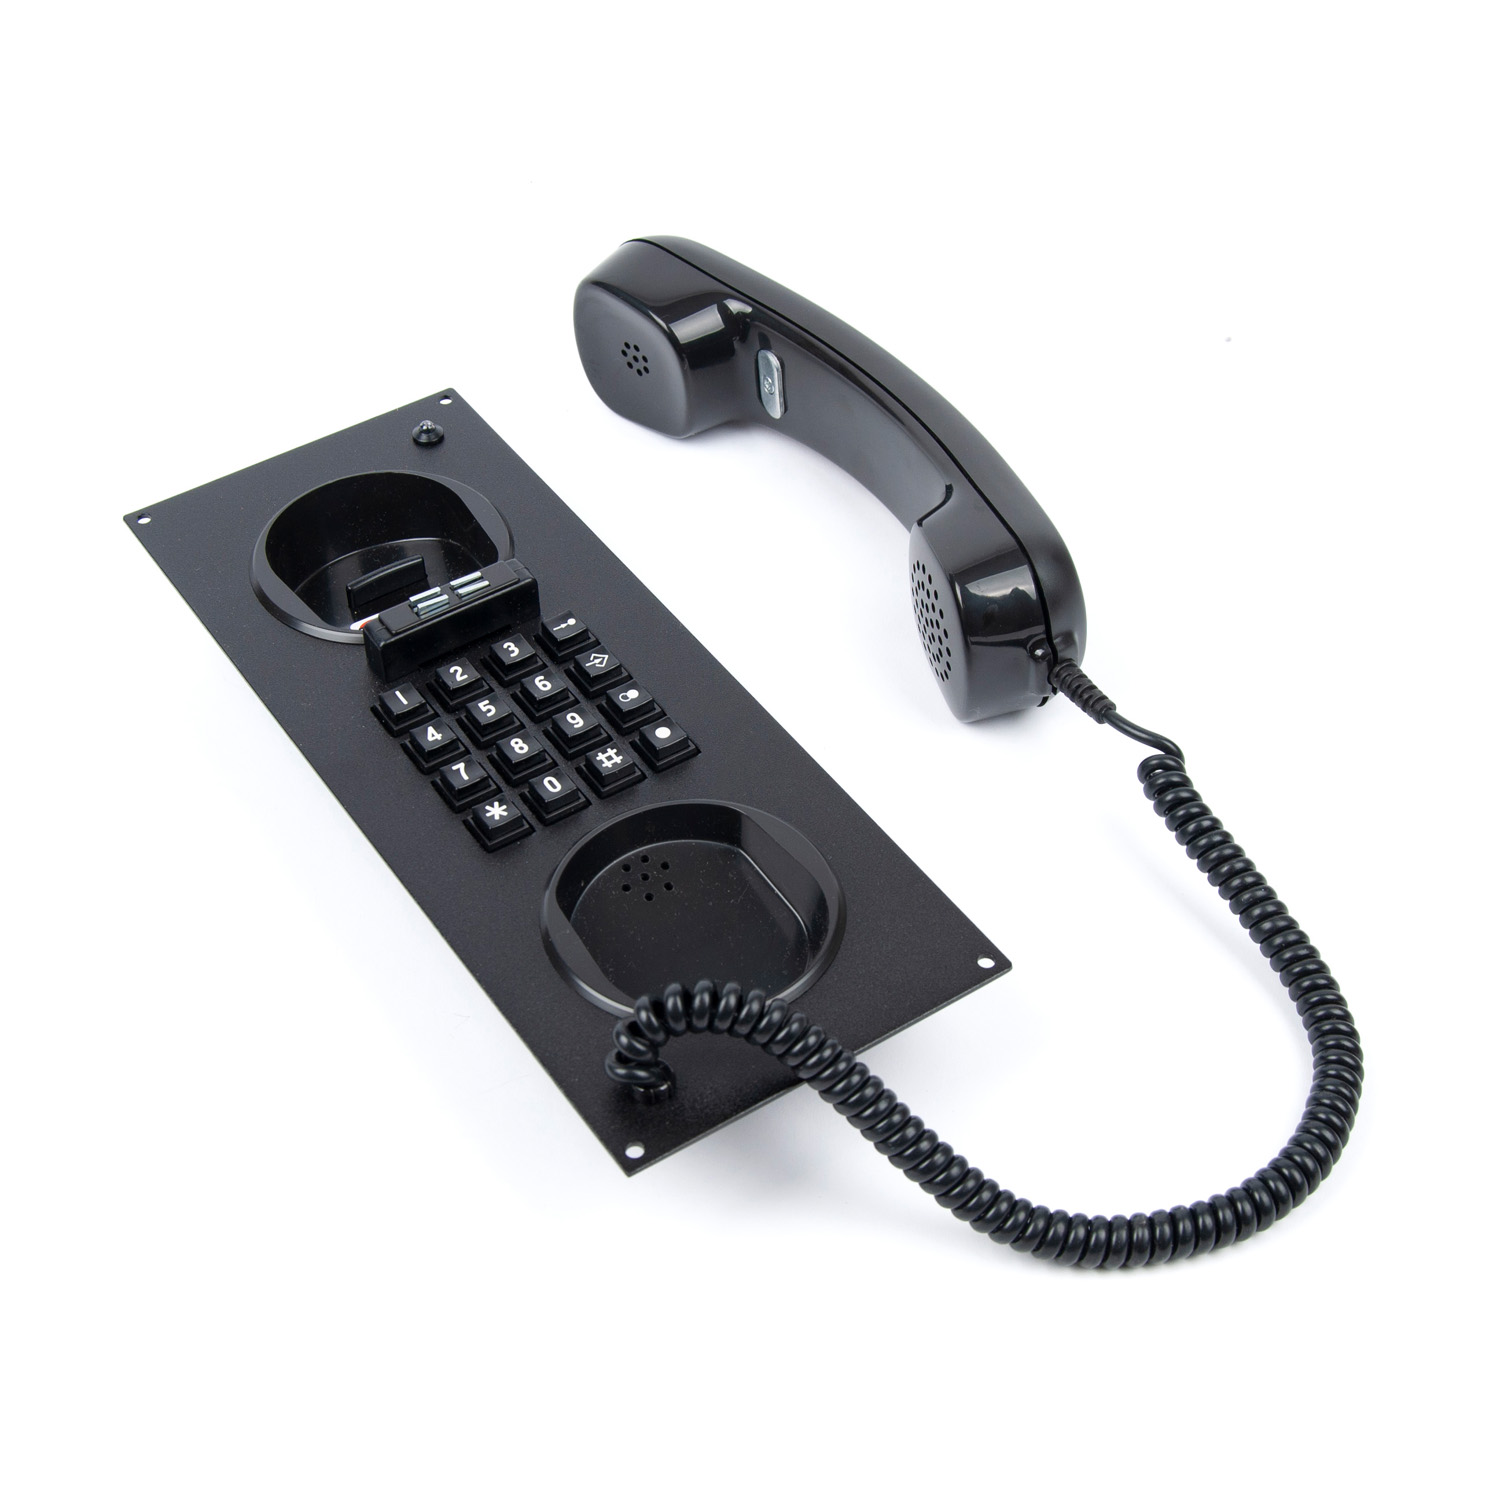 STC-503 Analogue telephone station flush mounting with handset